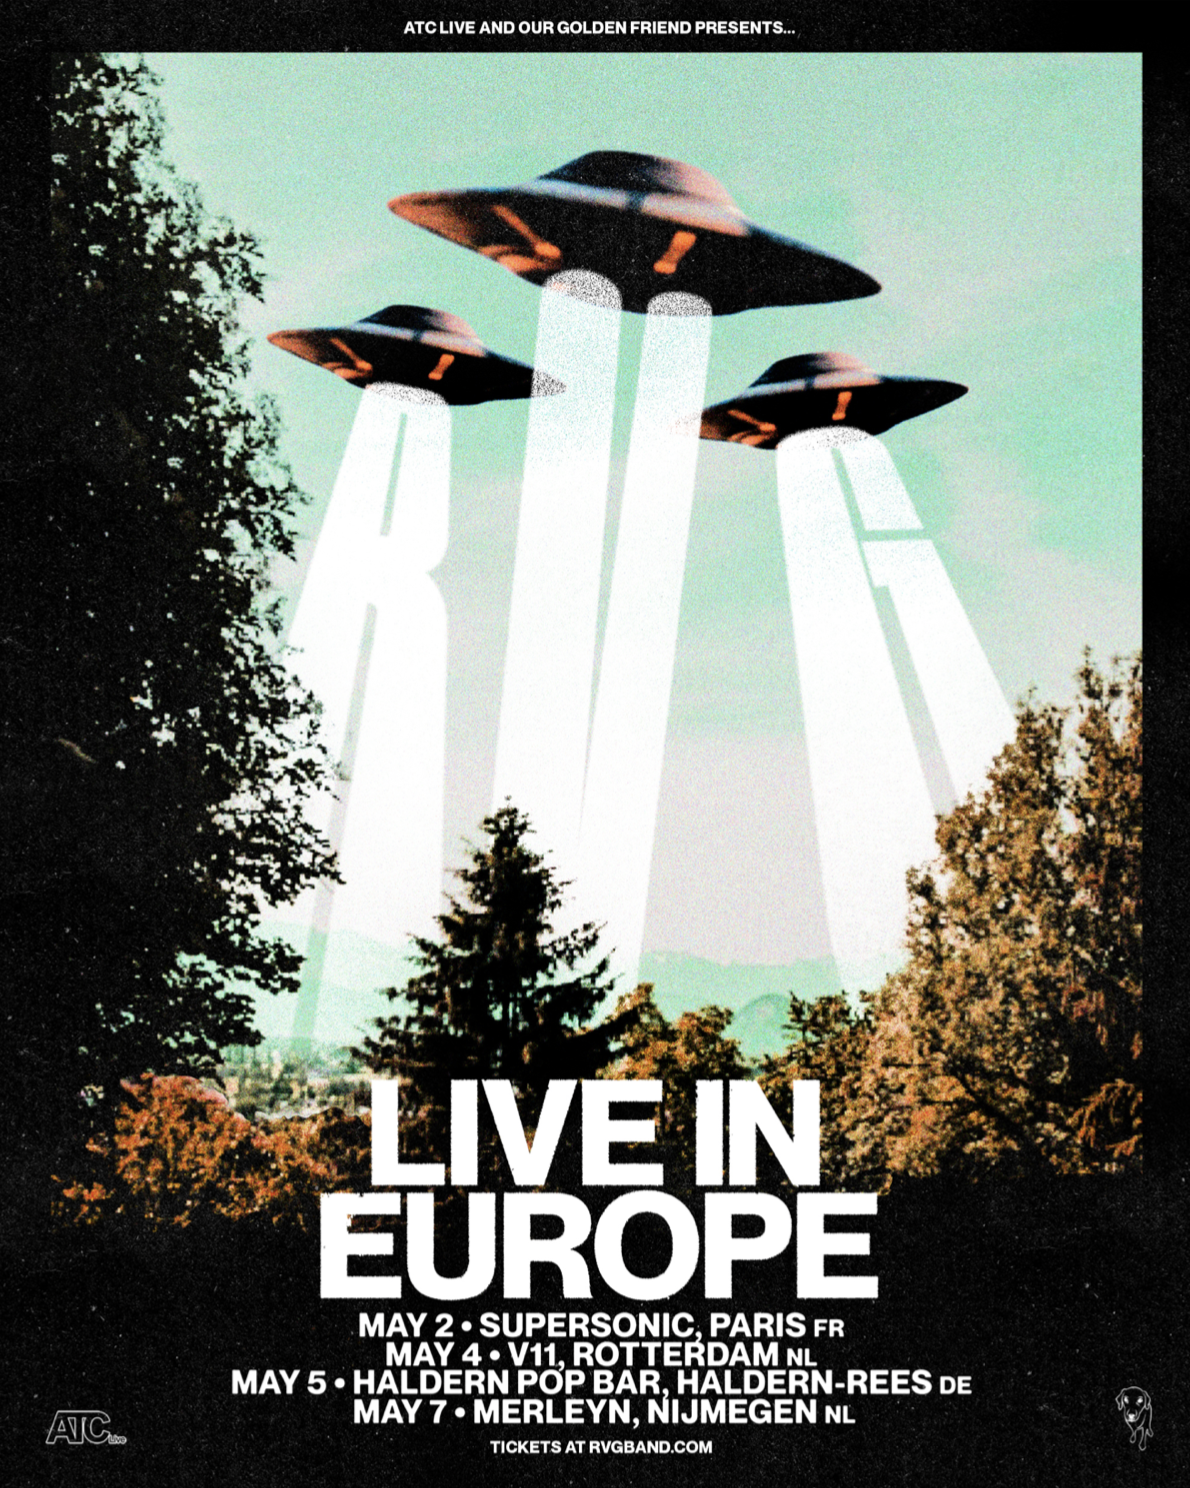 RVG Live In Europe Poster 02:05.png